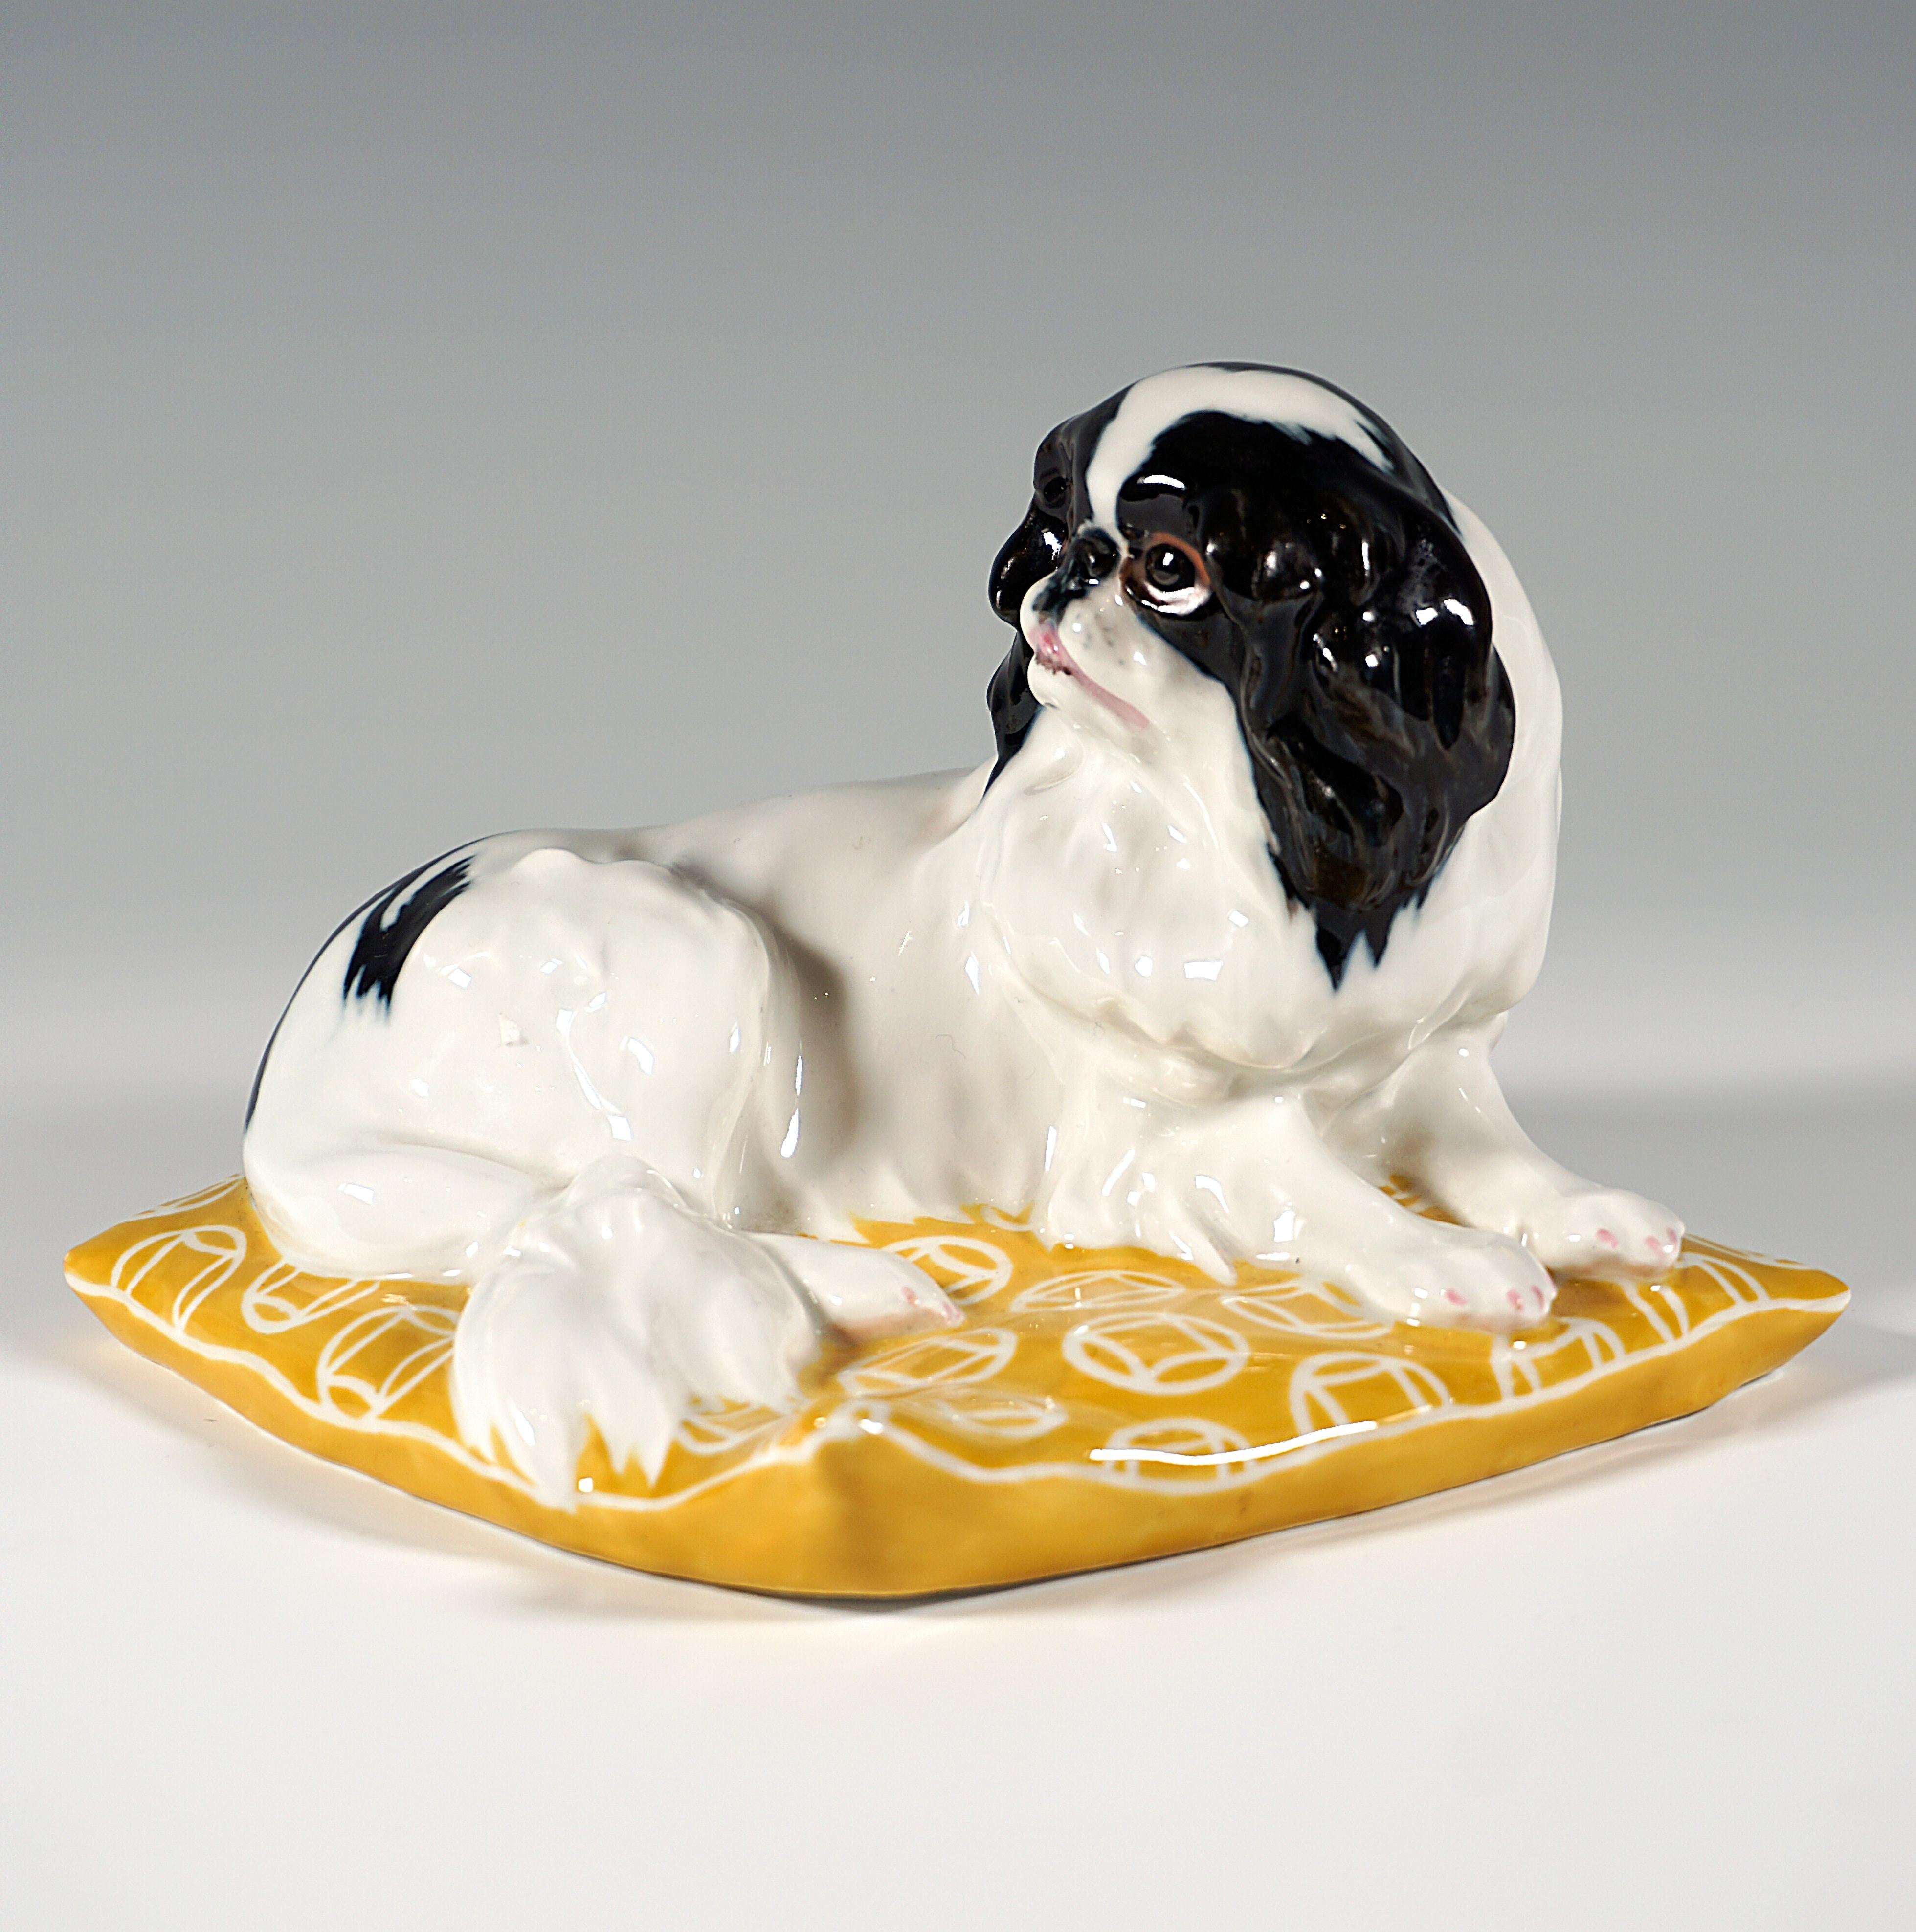 Rare Meissen Art Nouveau porcelain figurine:
Very lively representation of a Japan Chin dog with white and black fur on a large yellow pillow with a circular Art Nouveau decor.

Designer:
OSKAR ERICH HOESEL (1869 - 1951) was a German sculptor